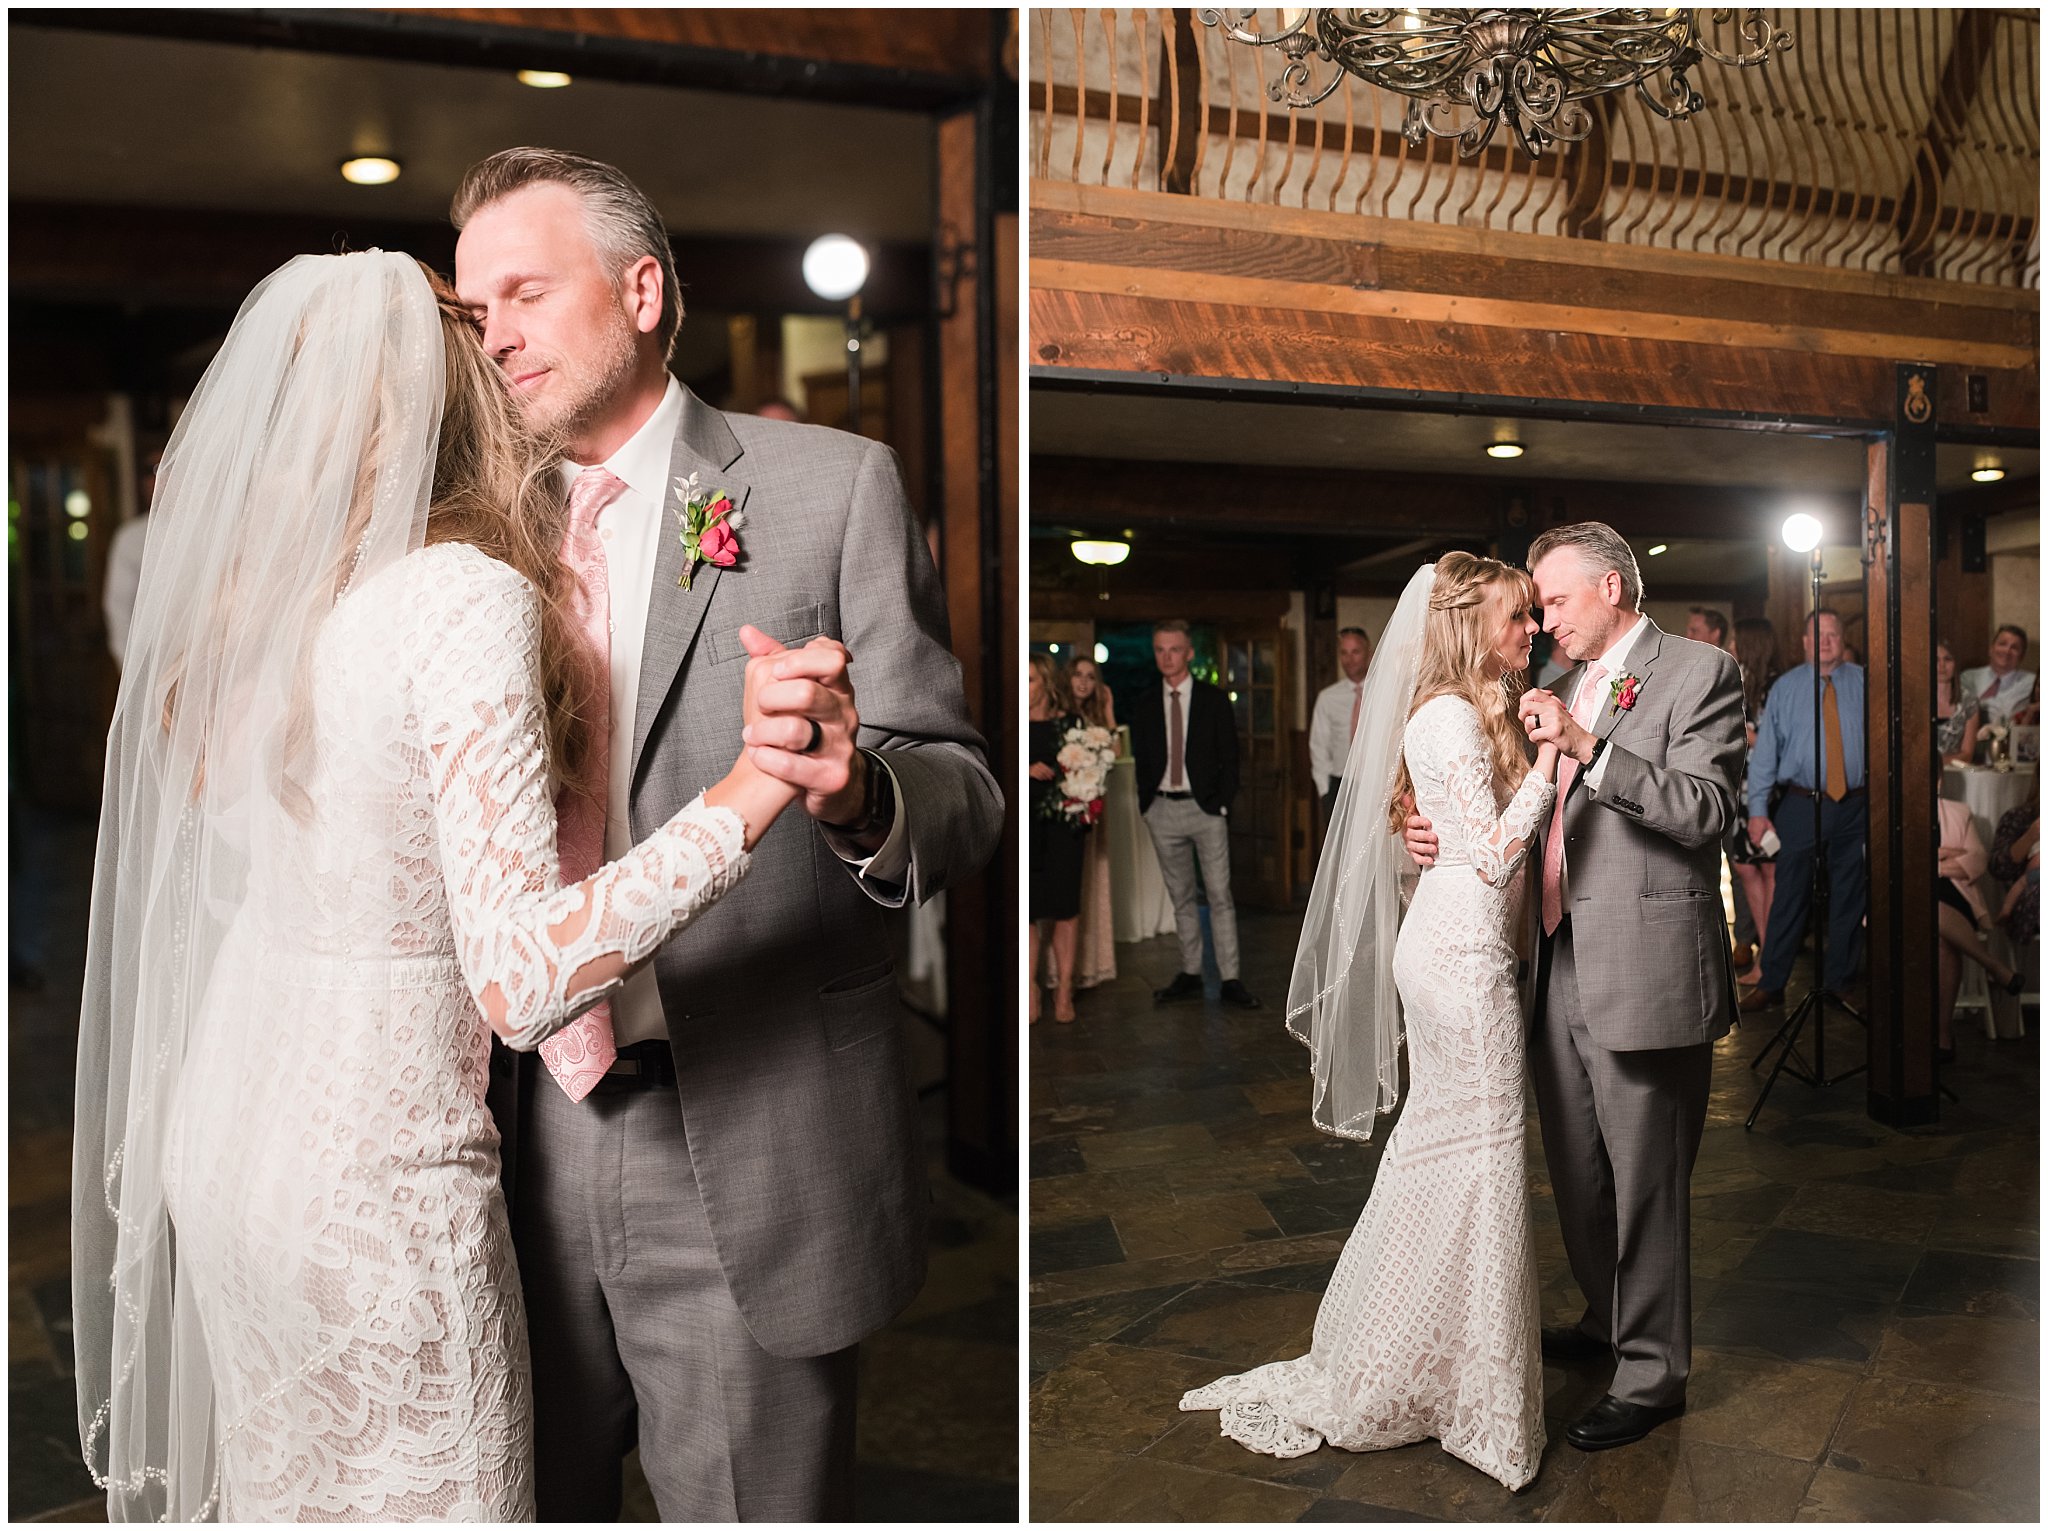 Father Daughter Dance during reception in the barn | Wadley Farms Summer Wedding | Jessie and Dallin Photography